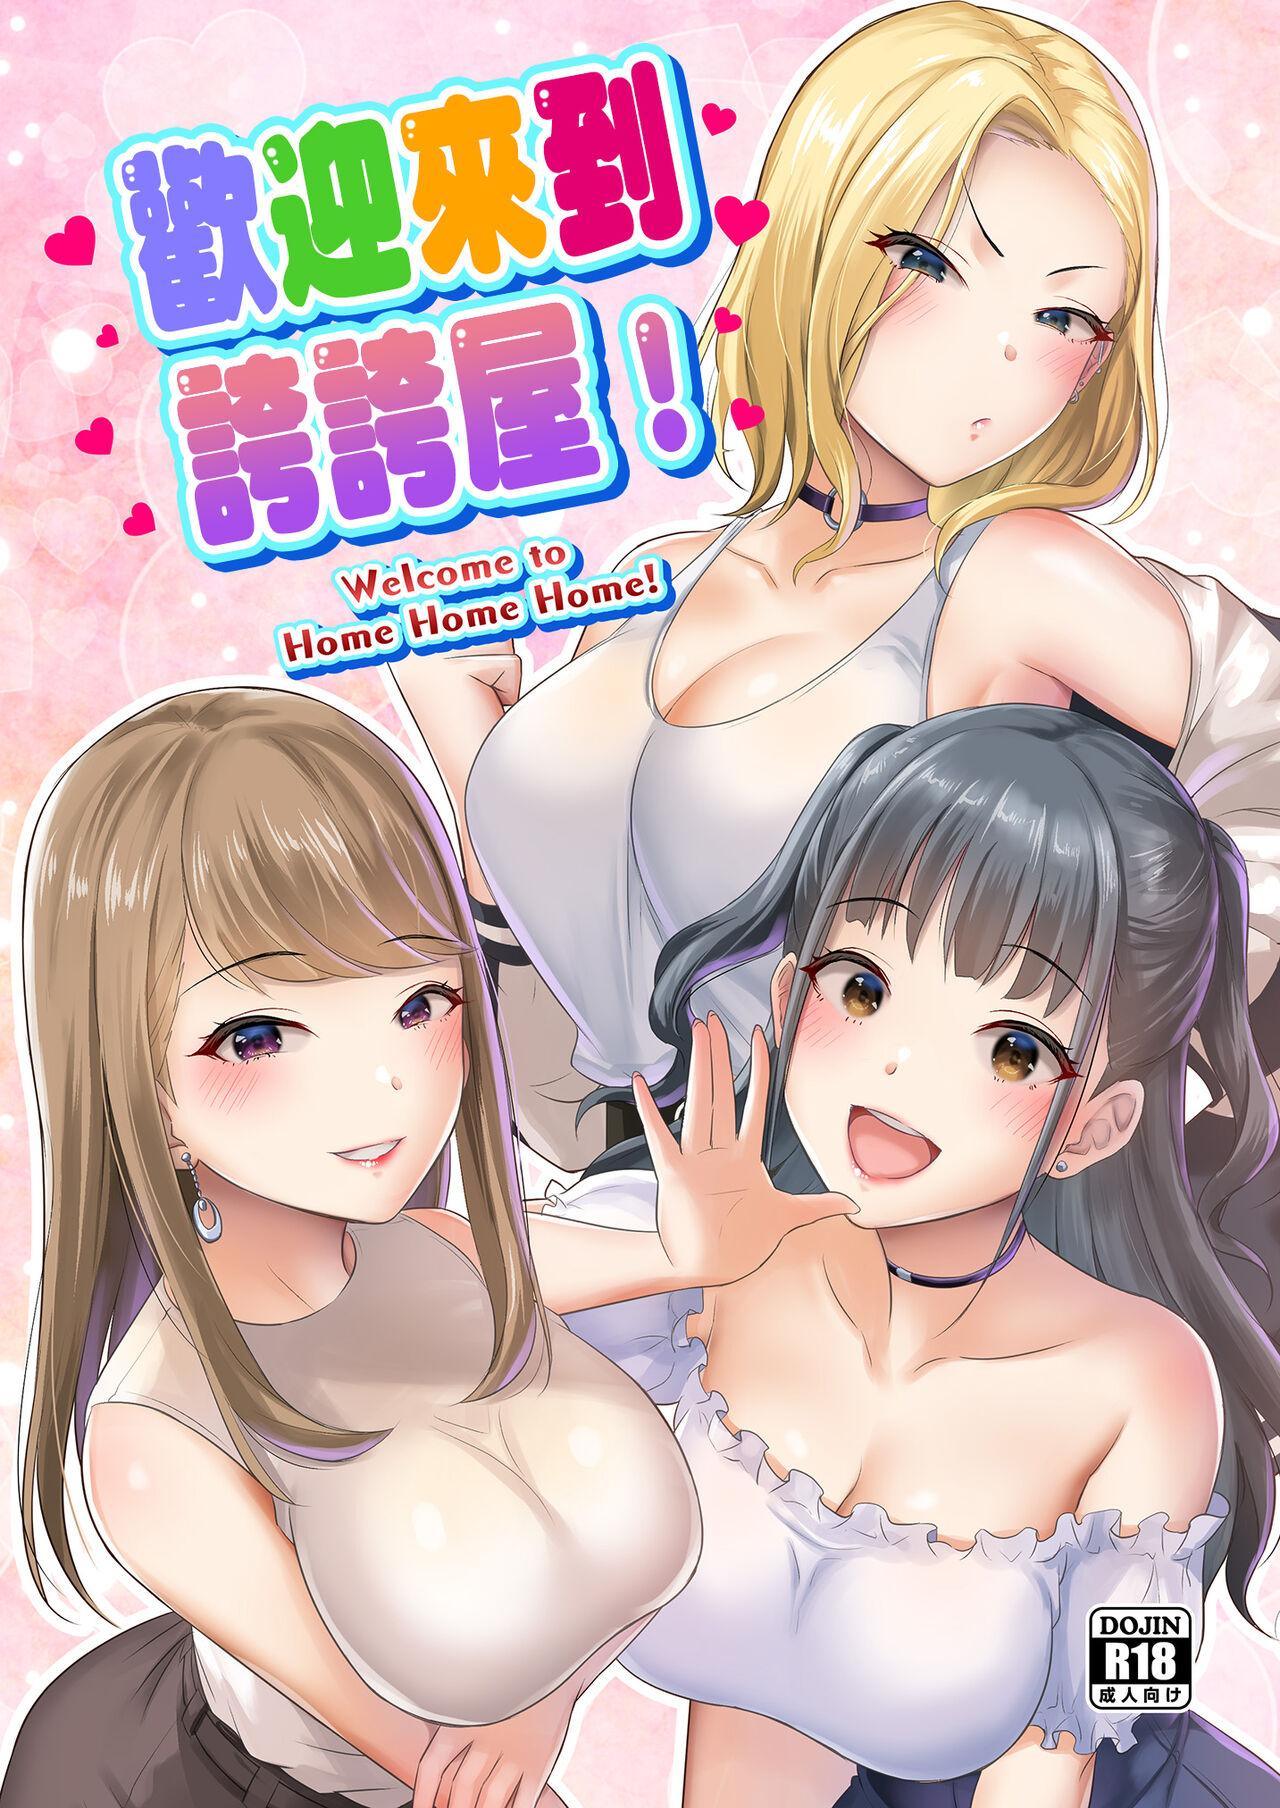 Girl Girl Homehome Home e Youkoso! - Welcome to Home Home Home! | 歡迎來到誇誇屋！ Gay Physicals - Page 2